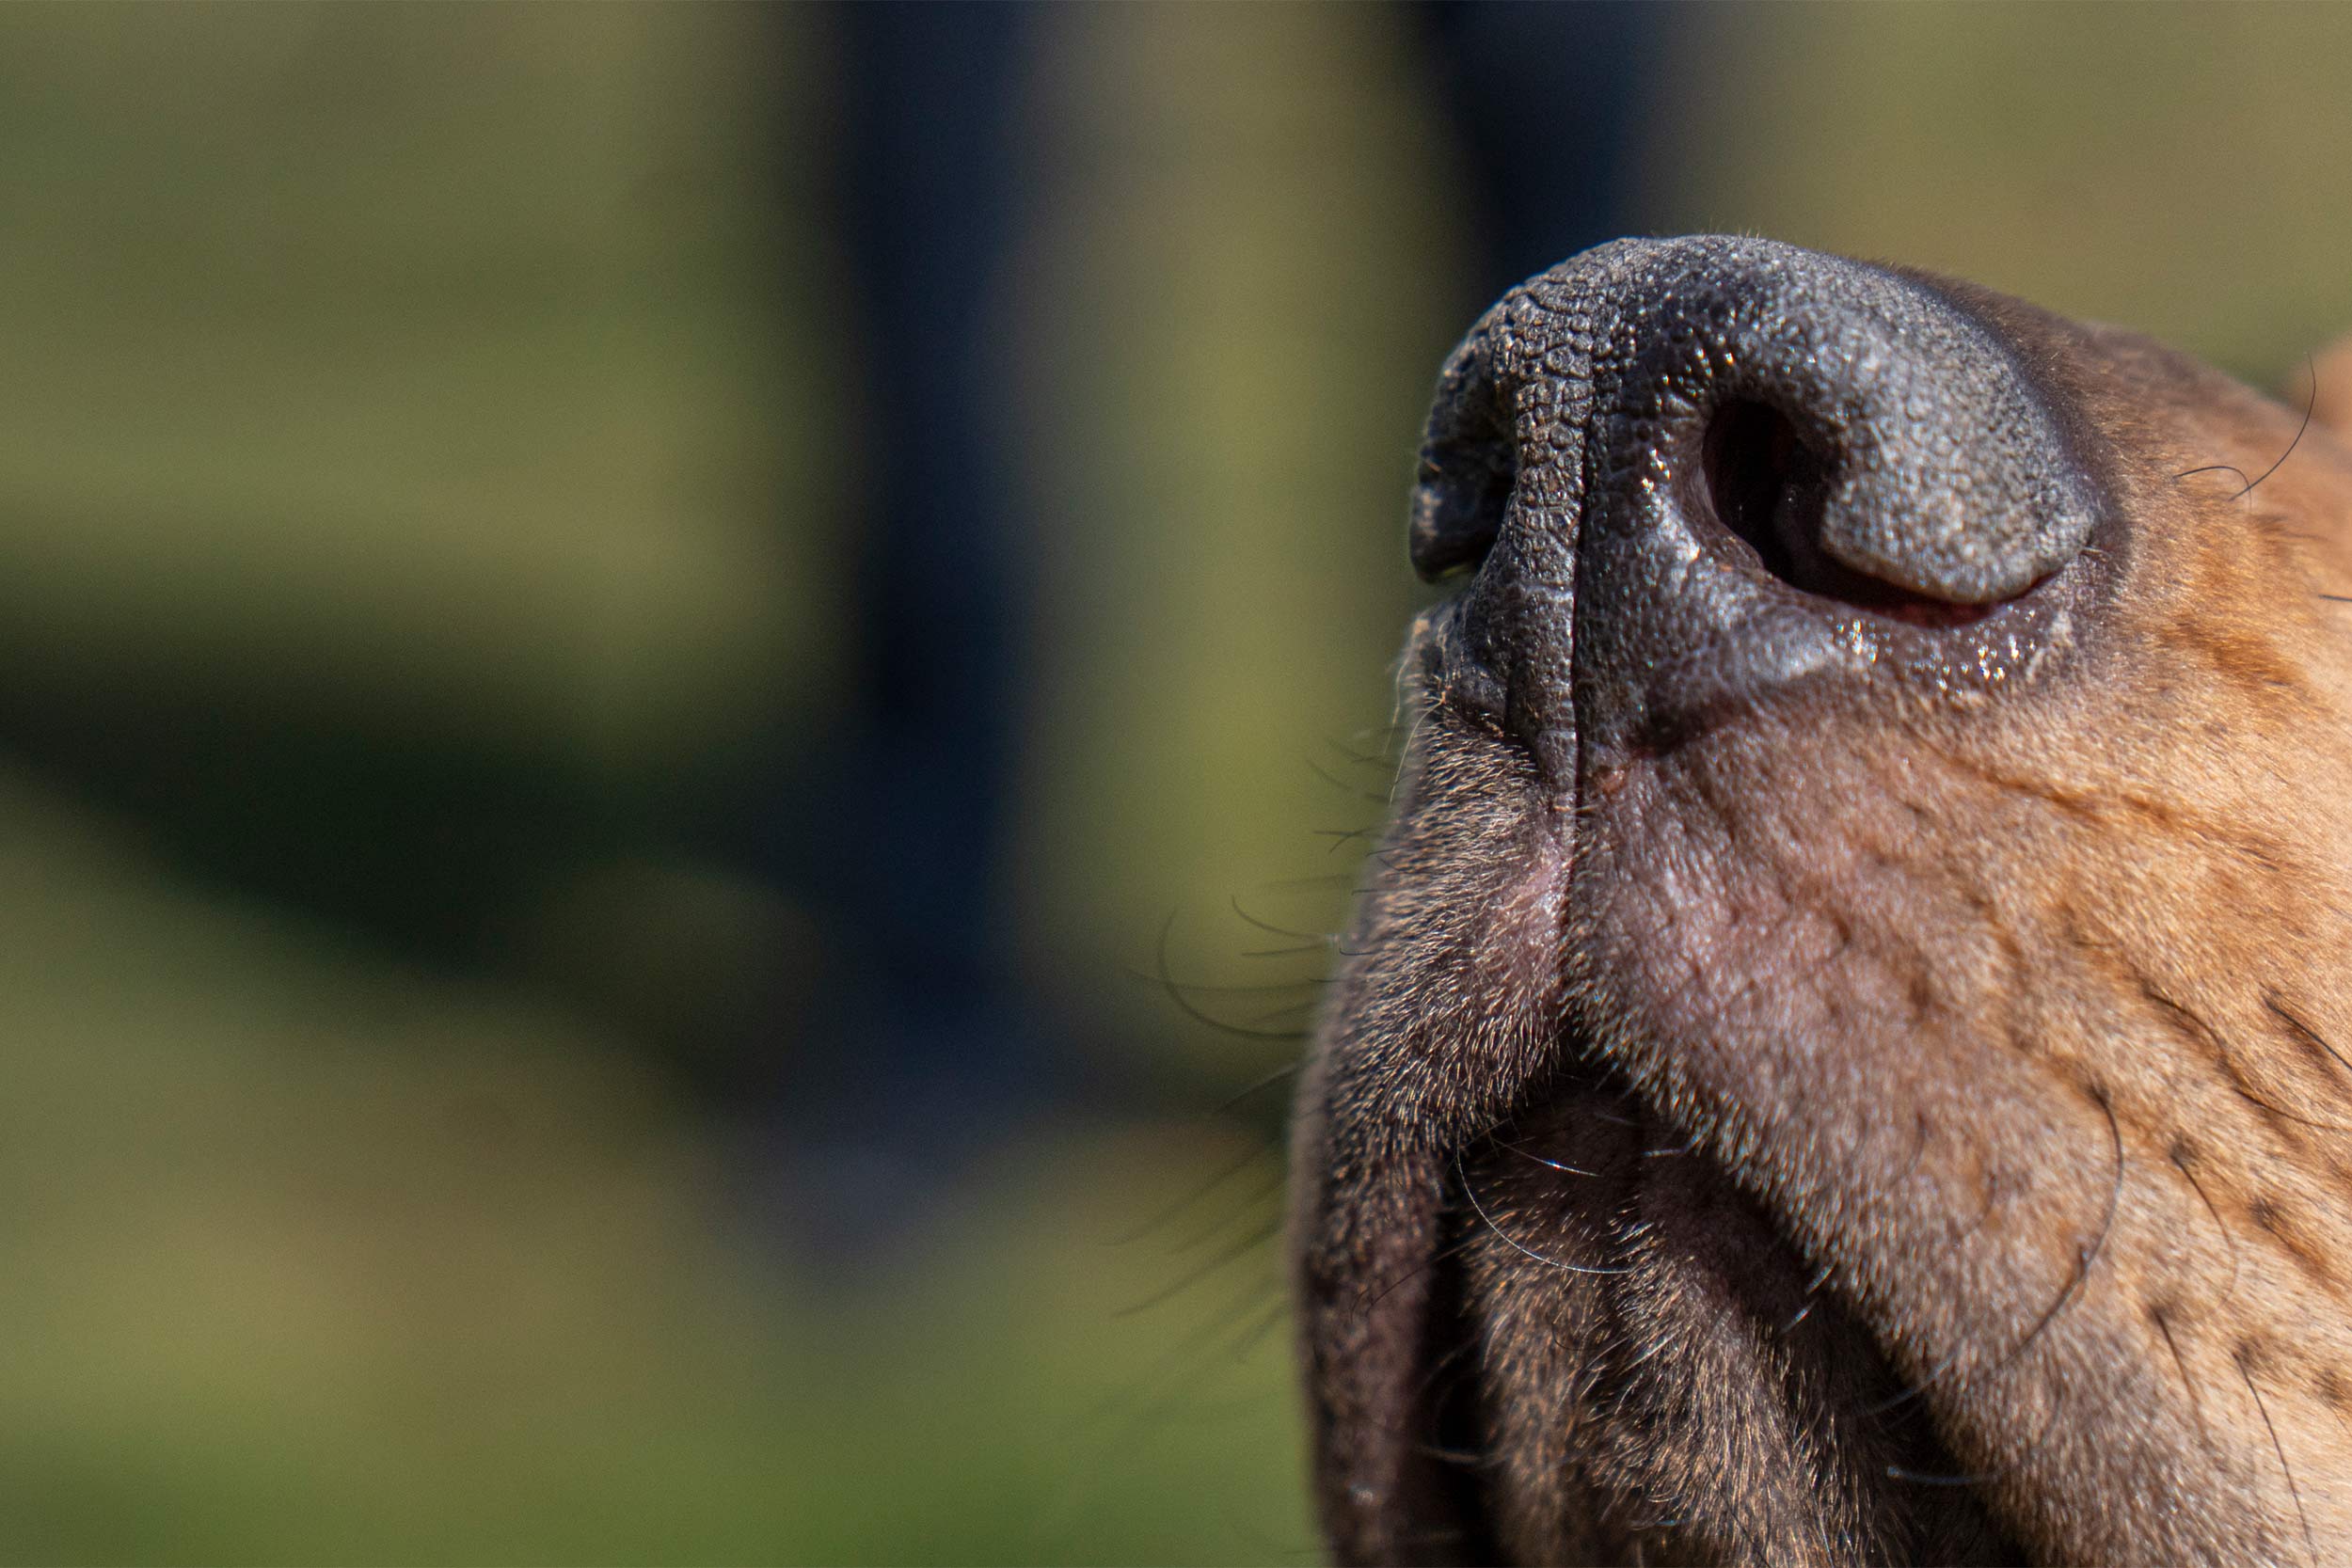 A close up of Maggie's bloodhound puppy nose